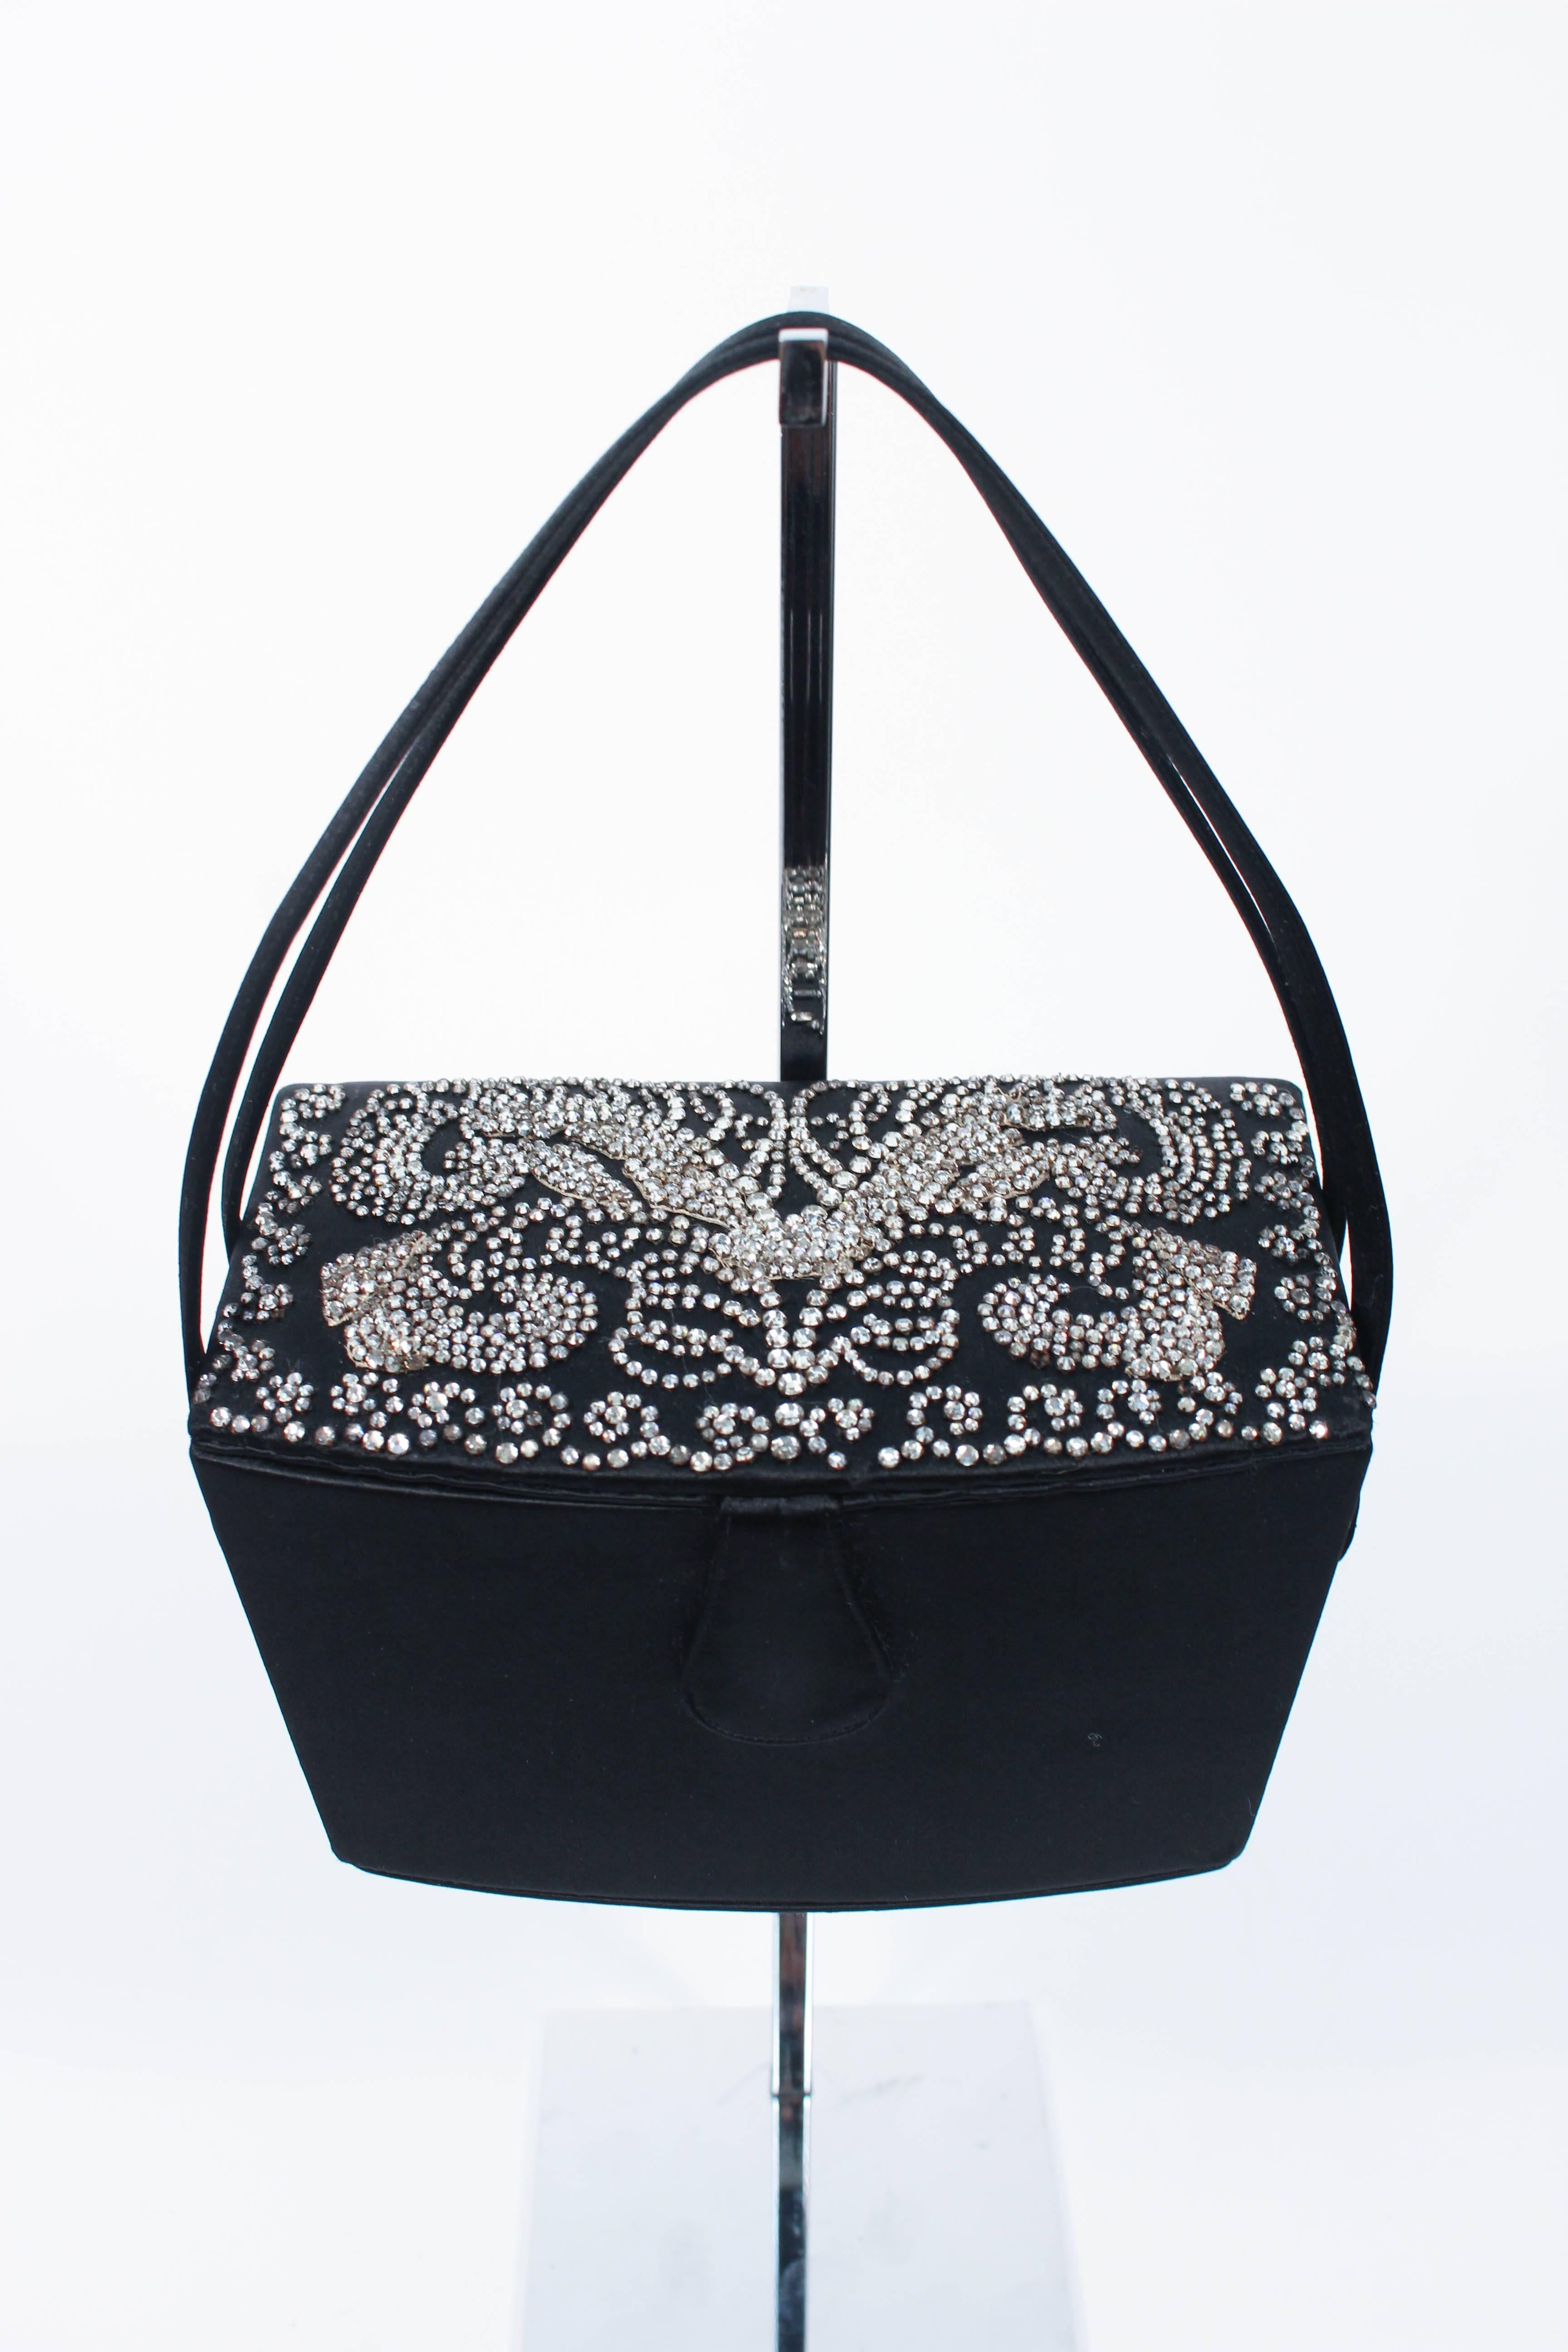 This vintage Josef purse is composed of a black silk satin. Features an intricate rhinestone rhinestone applique top. Comes with a rhinestone pen, wallet, and miniature mirror. There is an interior compartment with silk lining and mirrored interior